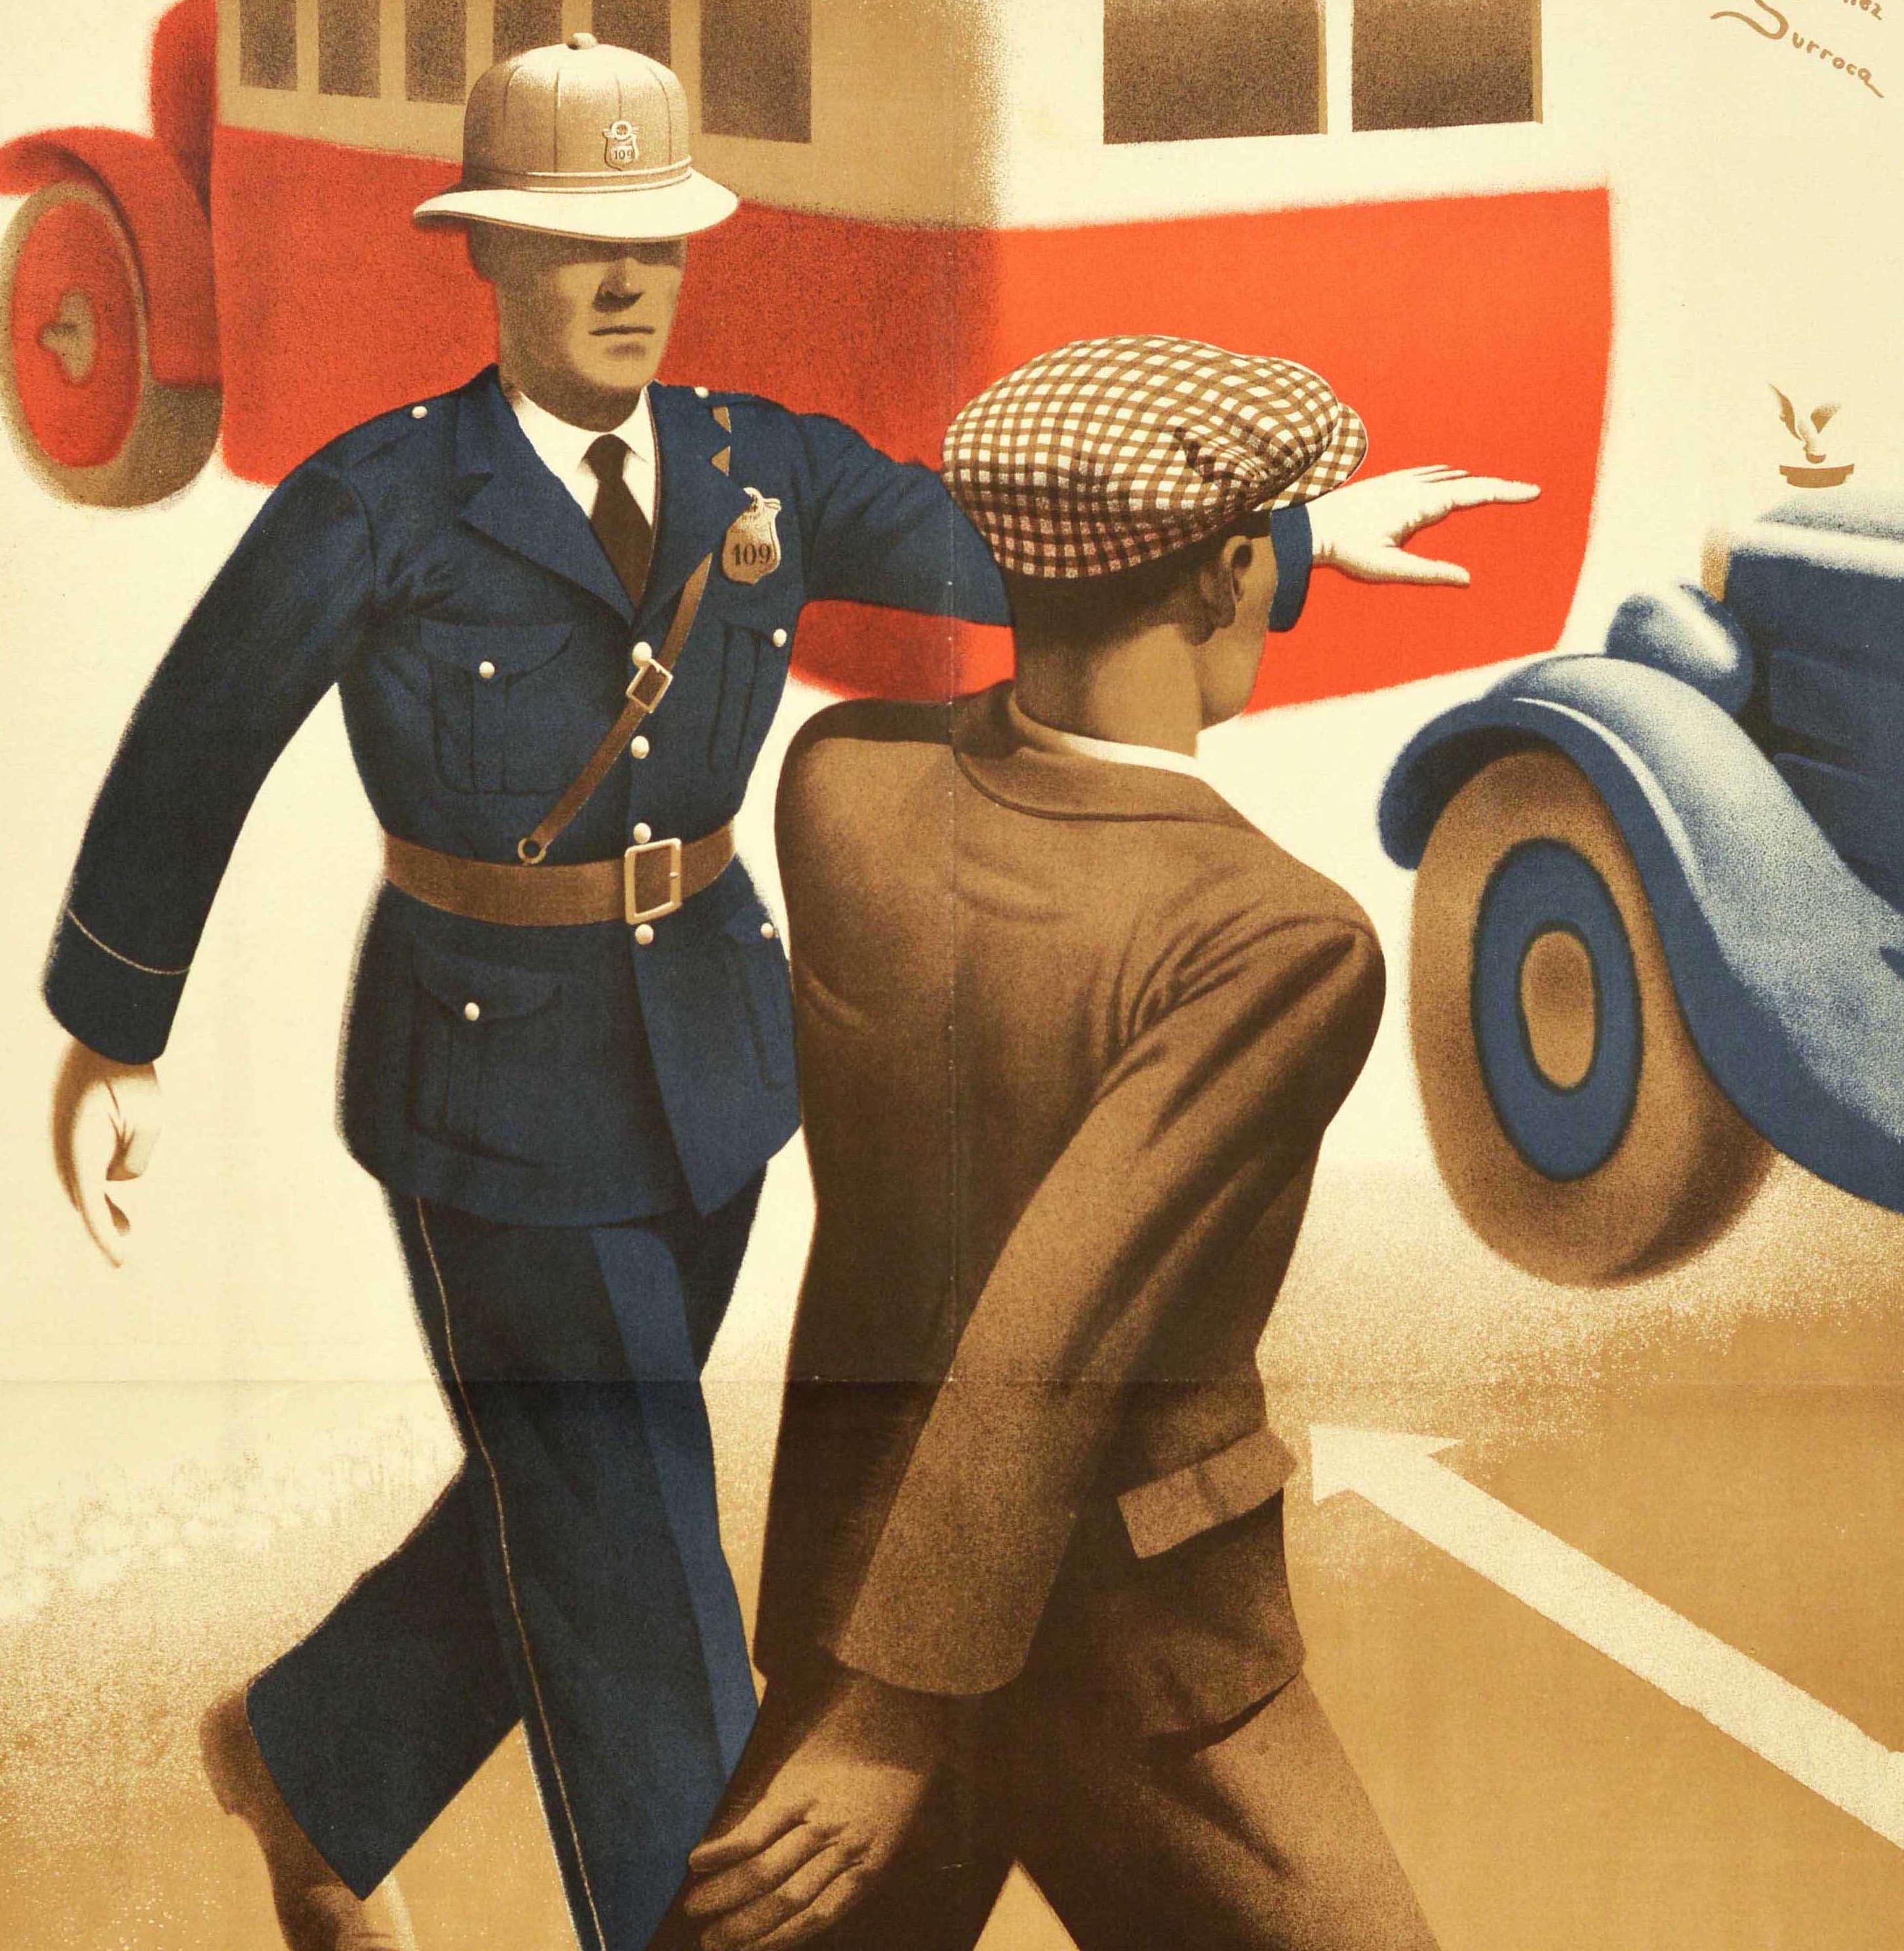 Original vintage road safety propaganda poster - Obey the traffic officer He watches over your life / Obeeix l'agent de trafic Ell vetlla per la teva vida. Great Art Deco design depicting a traffic policeman in uniform holding out one arm as a man